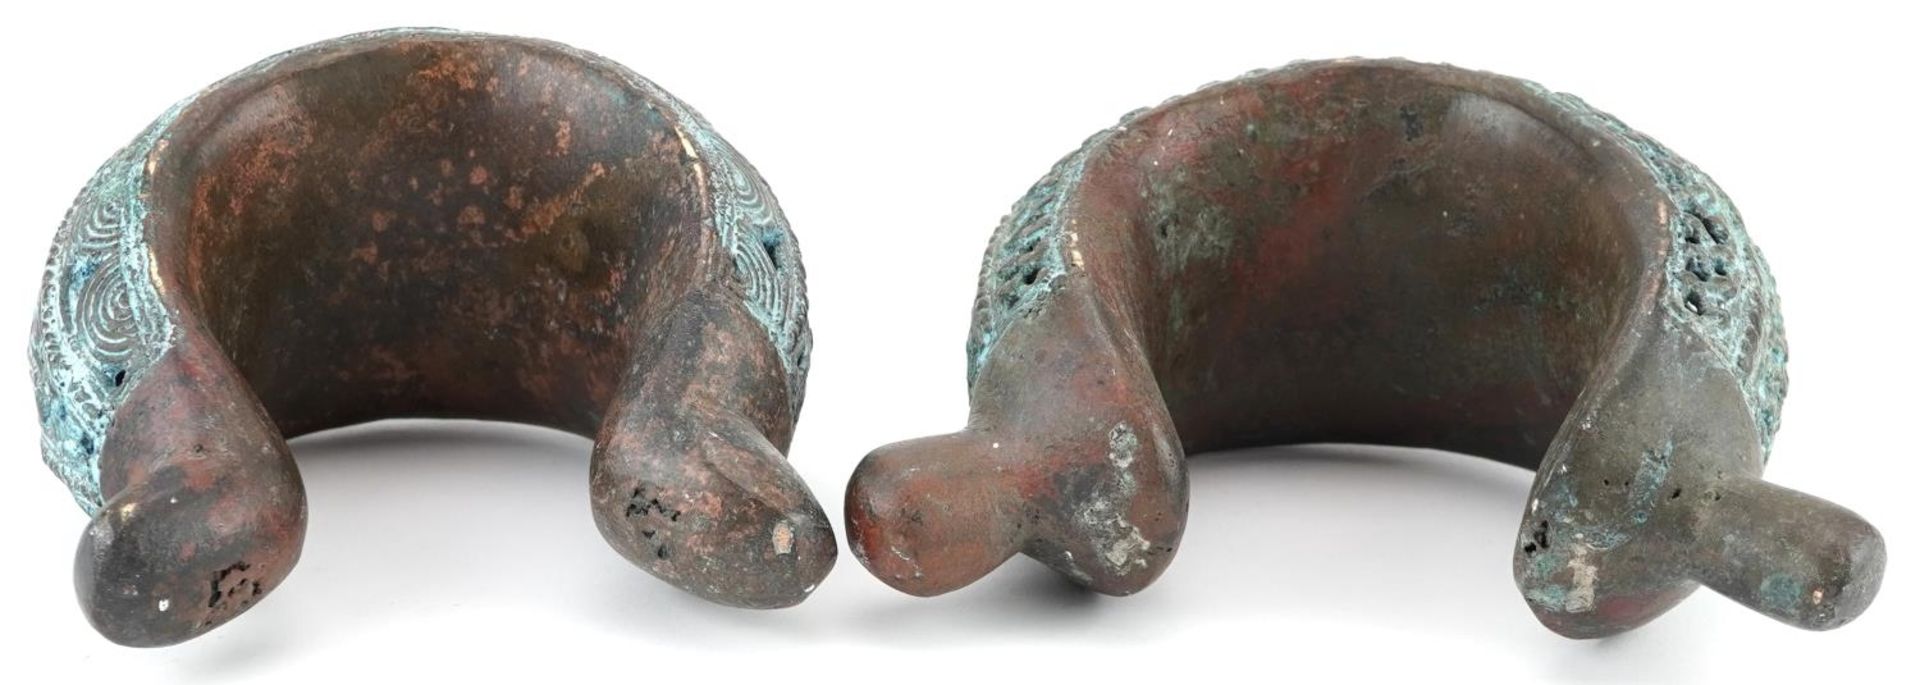 Two West African tribal interest verdigris copper open cuffs, the largest 17.5cm high - Image 2 of 3